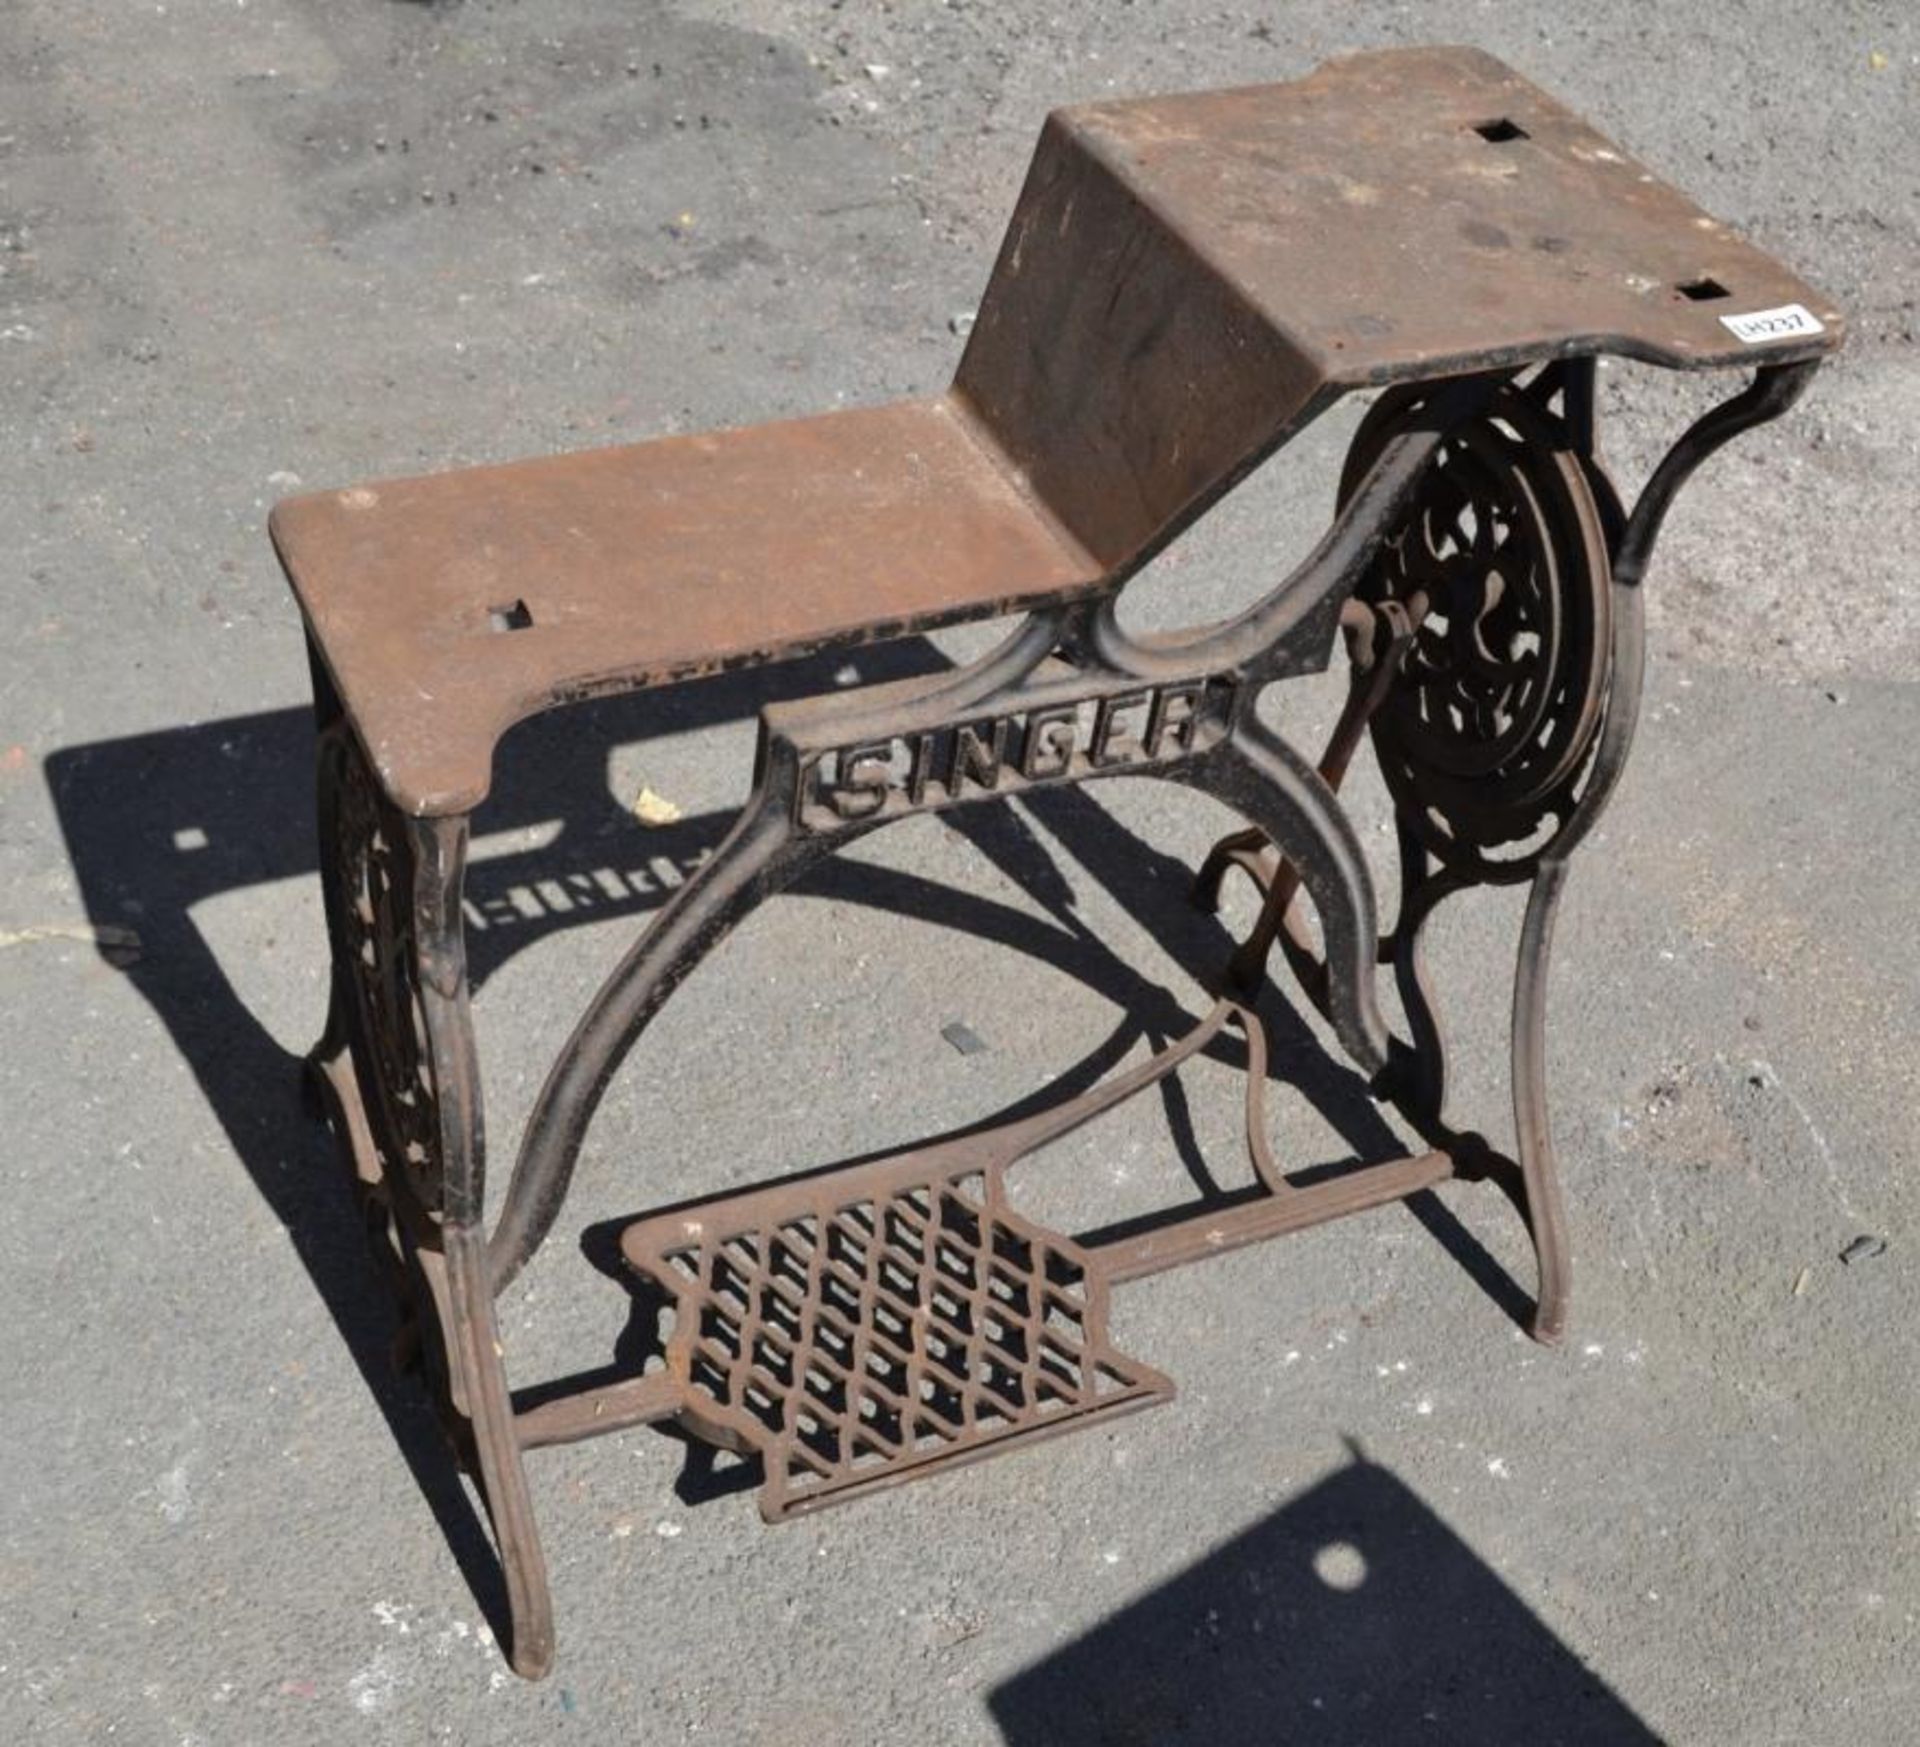 1 x Antique SINGER Cast Iron Sewing Machine Treadle Base - Features Working Peddle And Wheel Motion